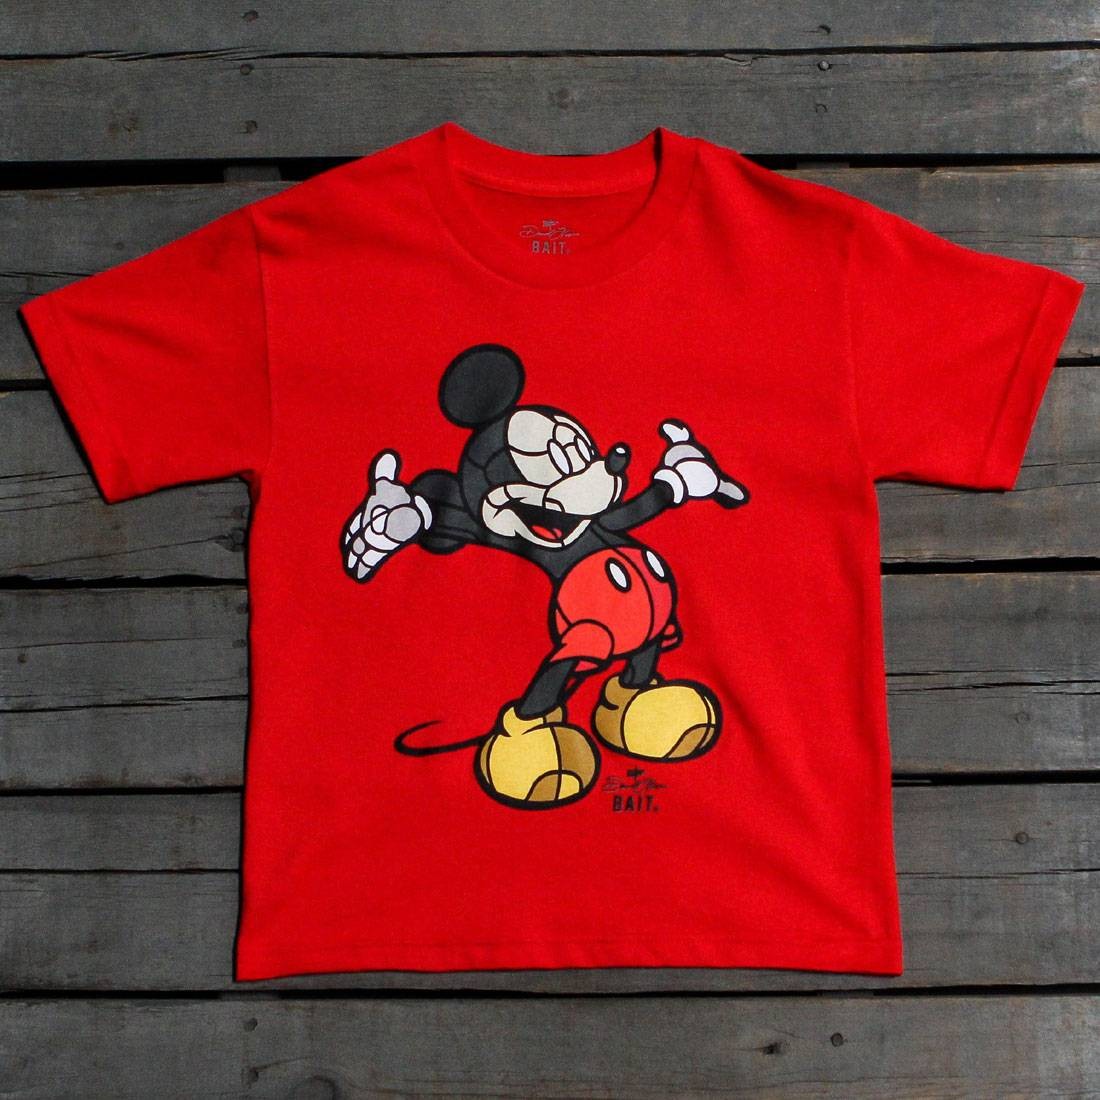 Cheap Urlfreeze Jordan Outlet x David Flores Mickey Youth Tee (red)